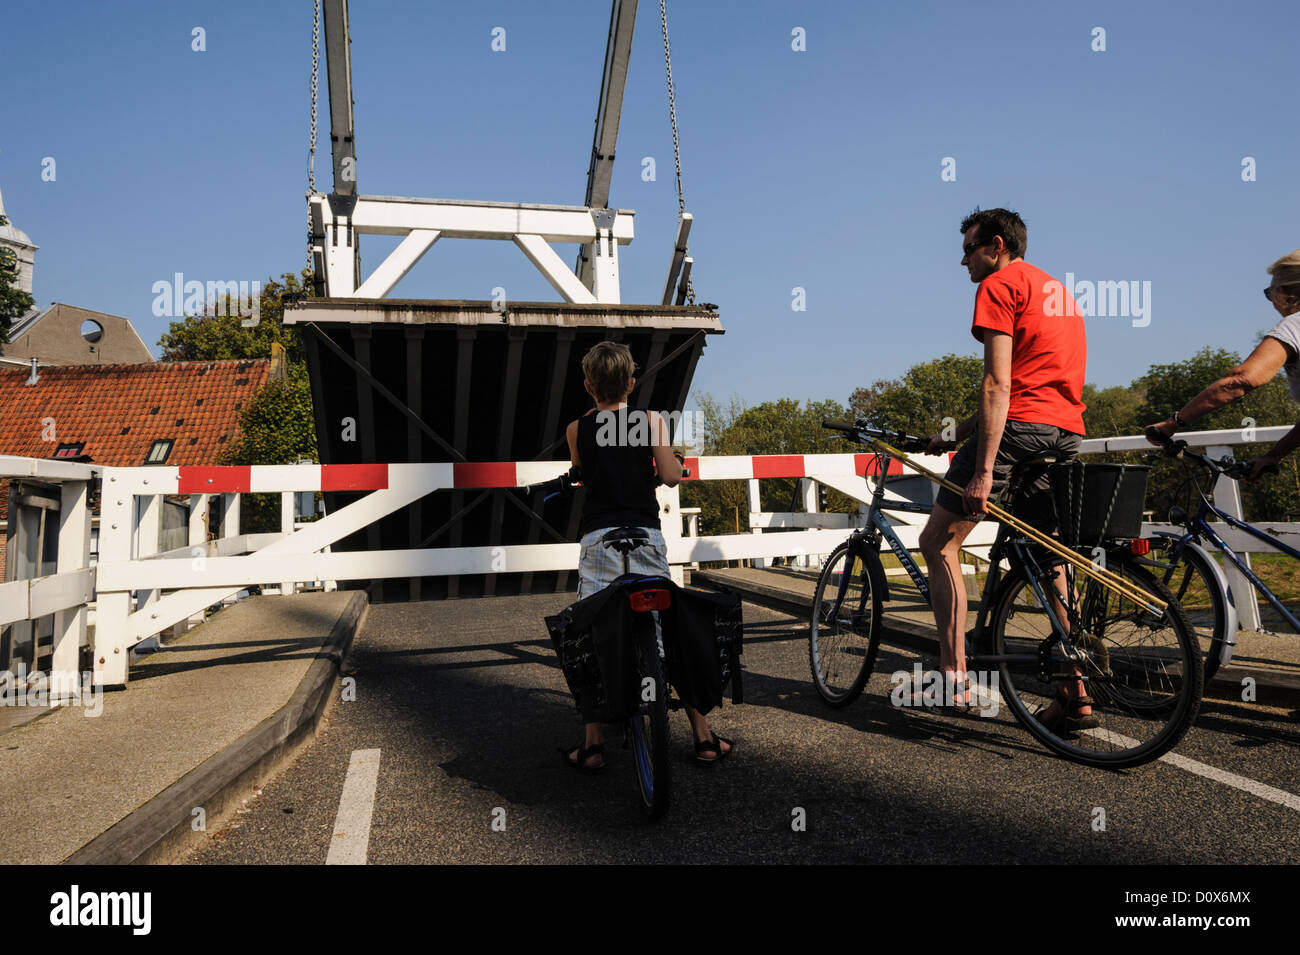 Cyclists waiting by bascule bridge, the Netherlands Stock Photo